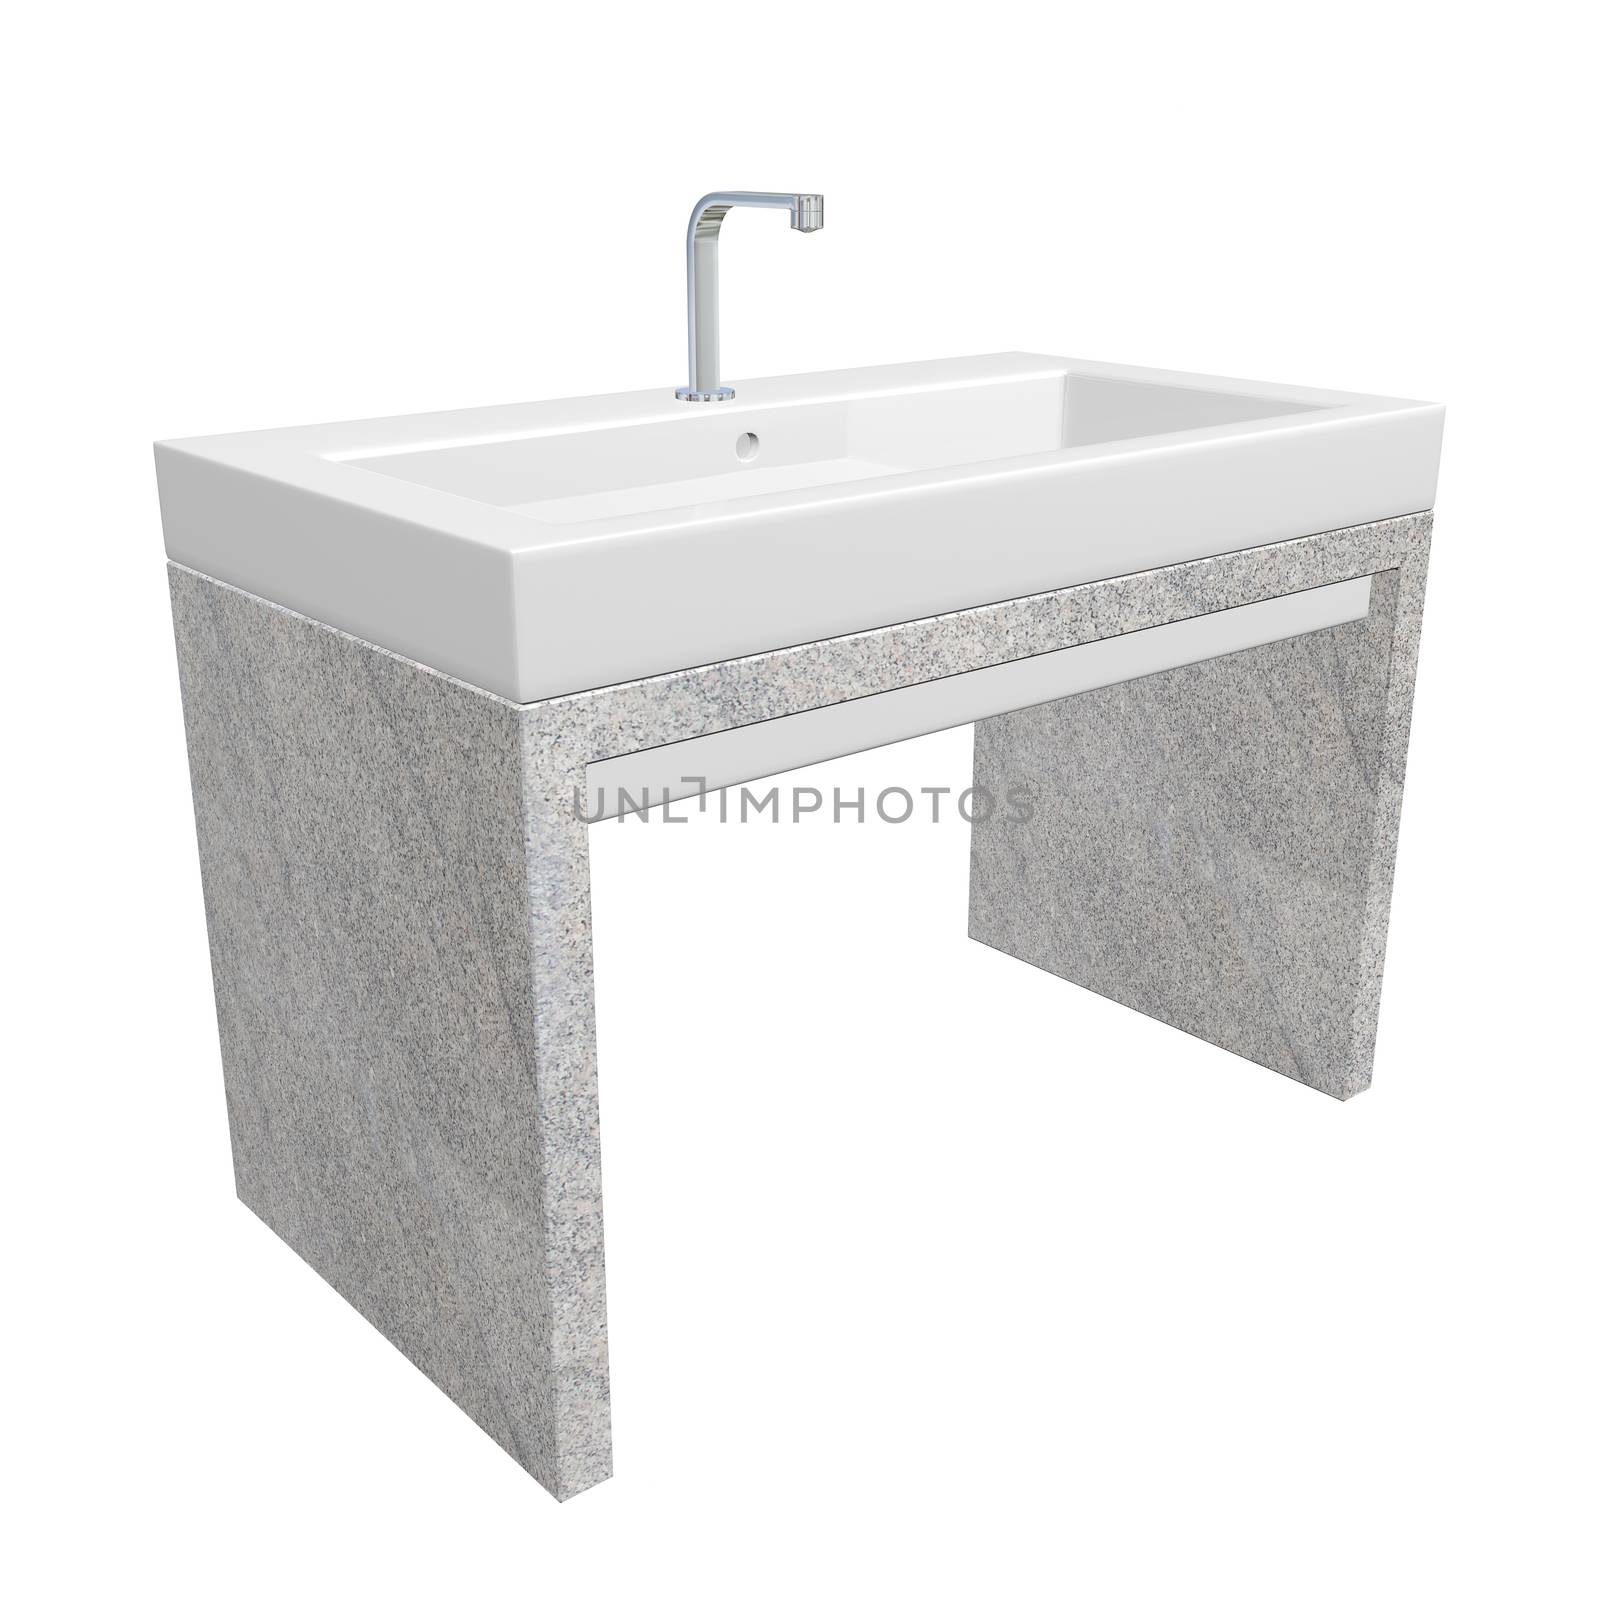 Modern washroom sink set with ceramic or acrylic wash basin, chrome fixtures, and granite base, 3d illustration, isolated against a white background